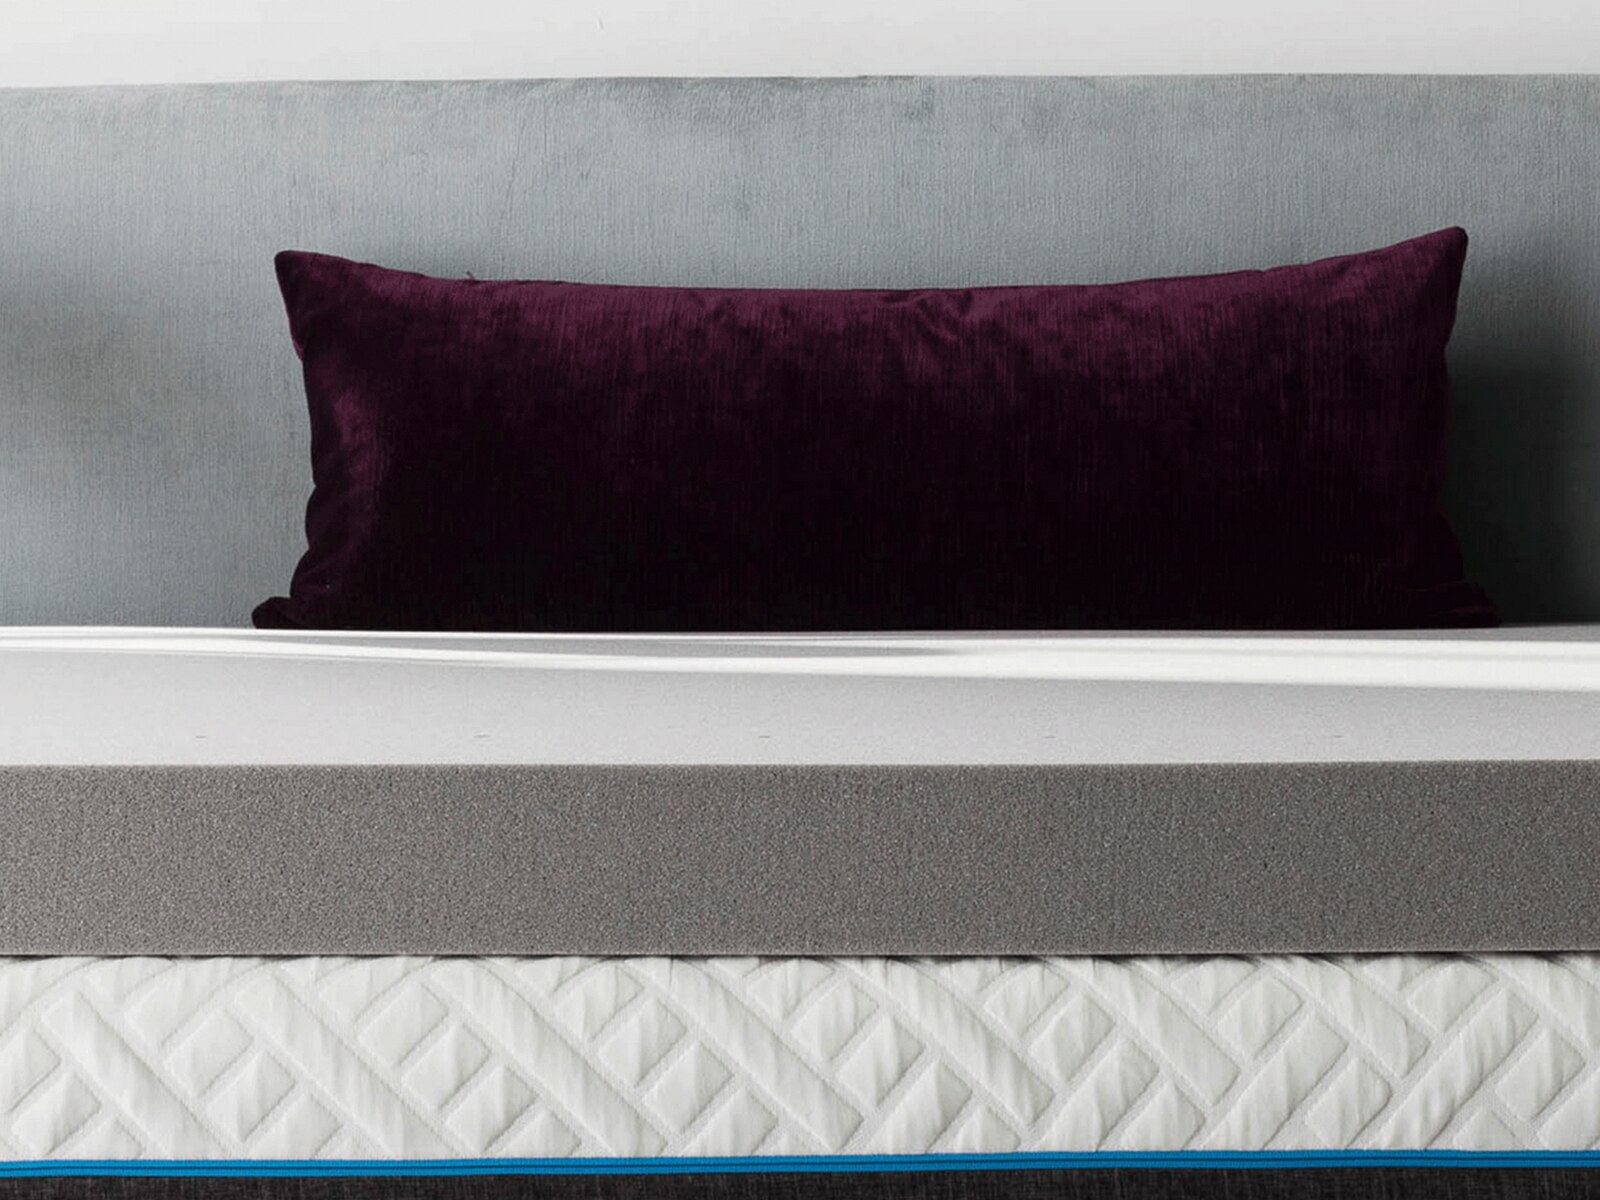 lucid bamboo charcoal hybrid mattress review